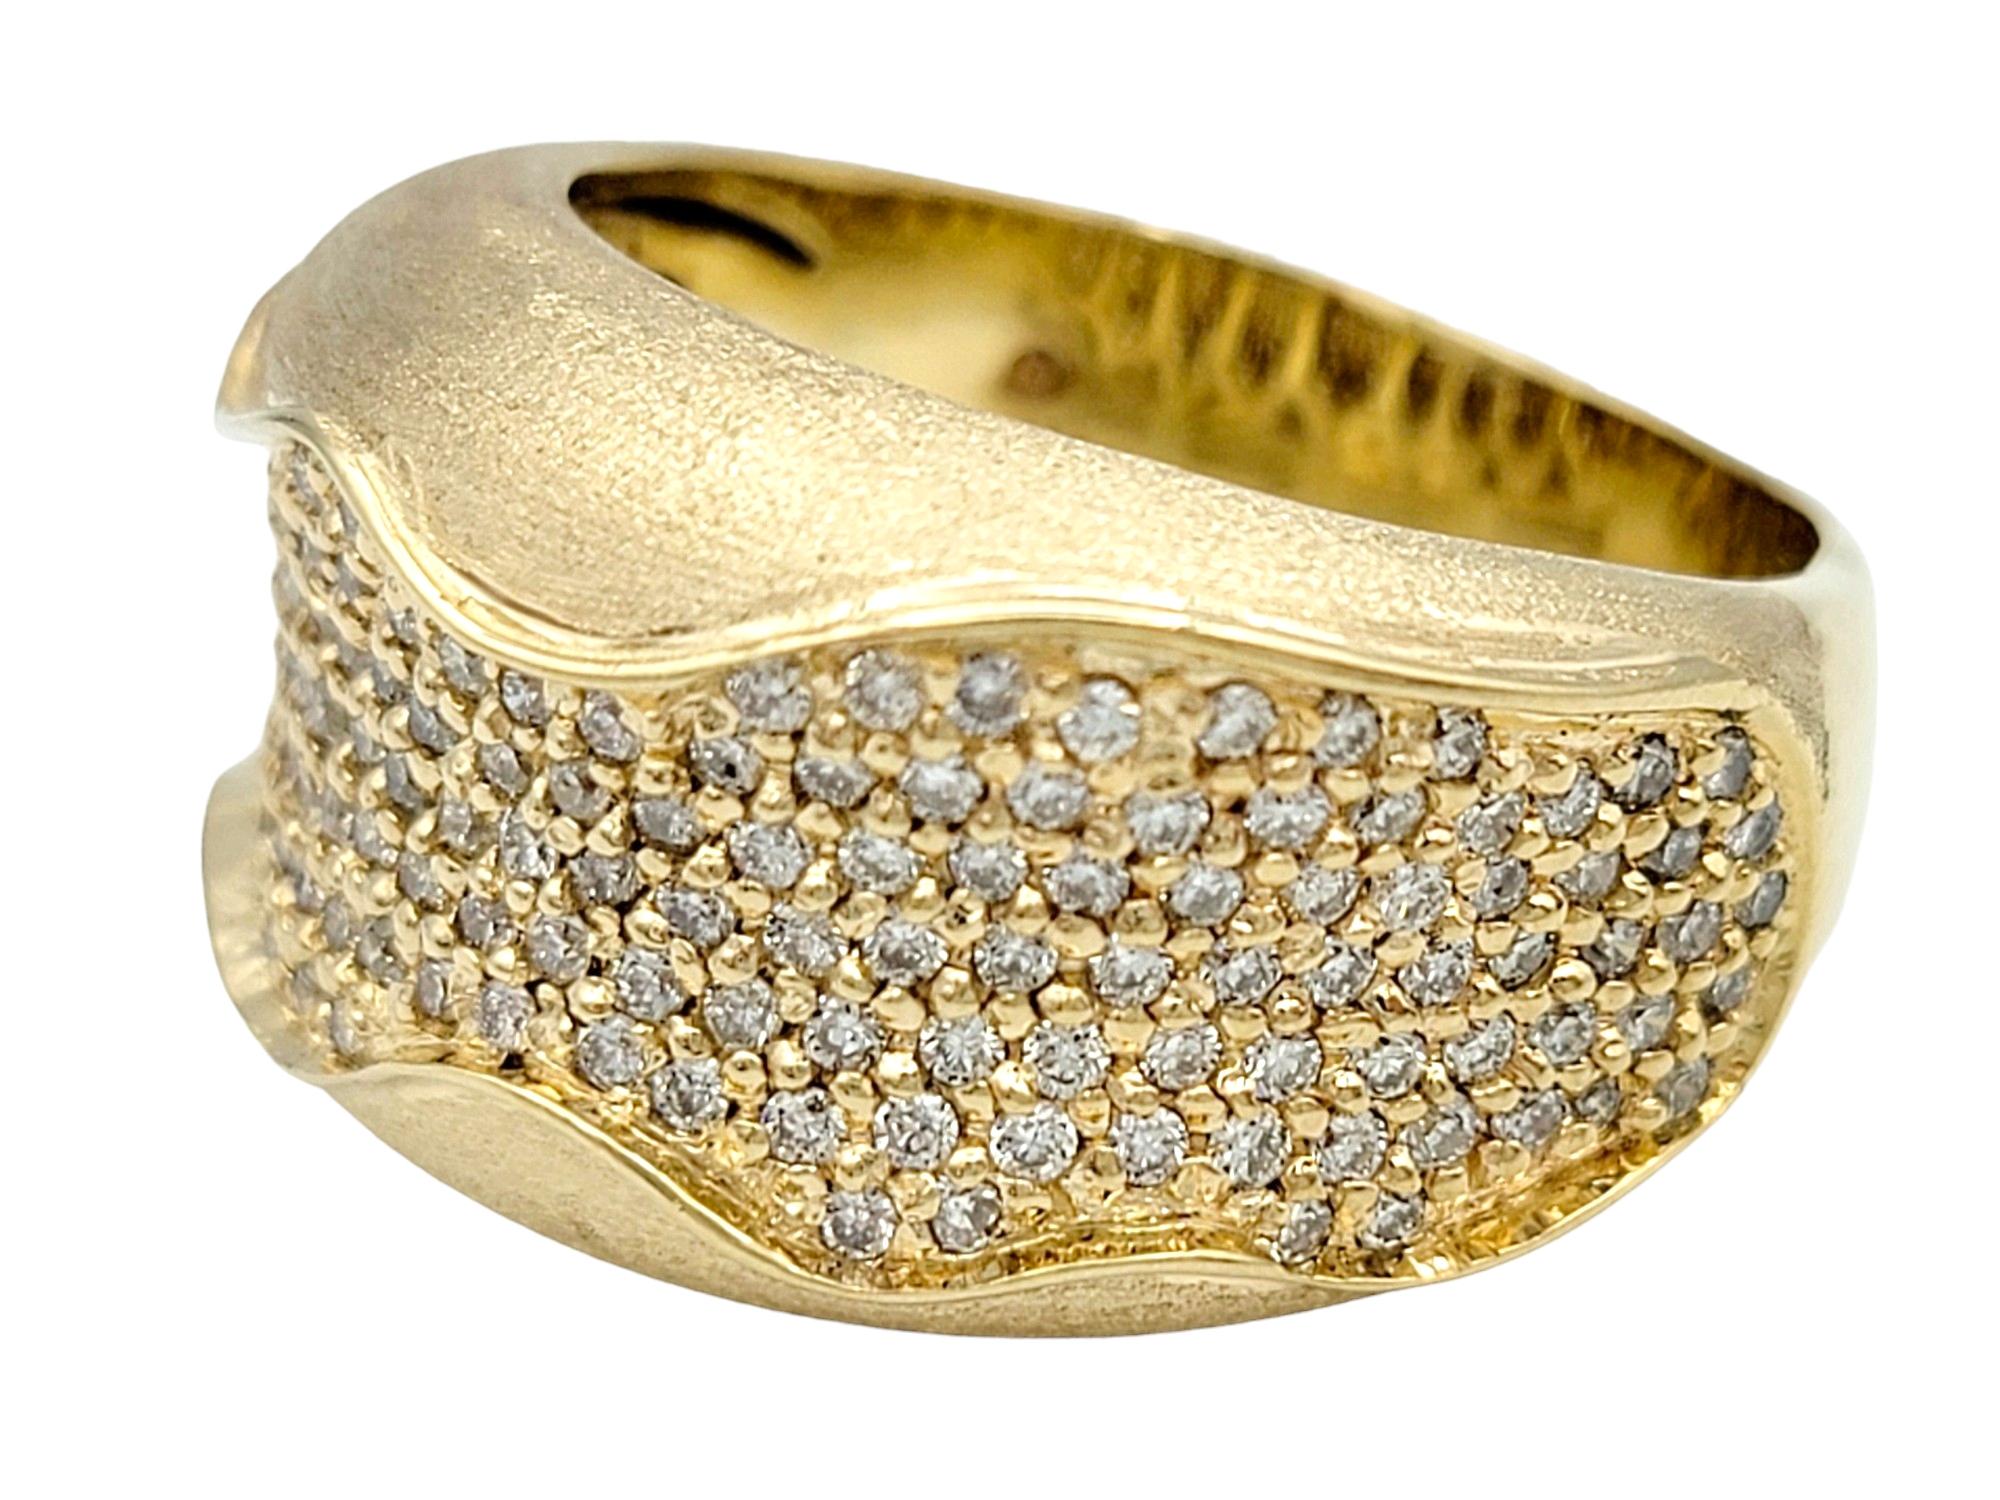 Pavé Diamond Wavy Inlay Wide Band Ring Set in Brushed 14 Karat Yellow Gold In Good Condition For Sale In Scottsdale, AZ